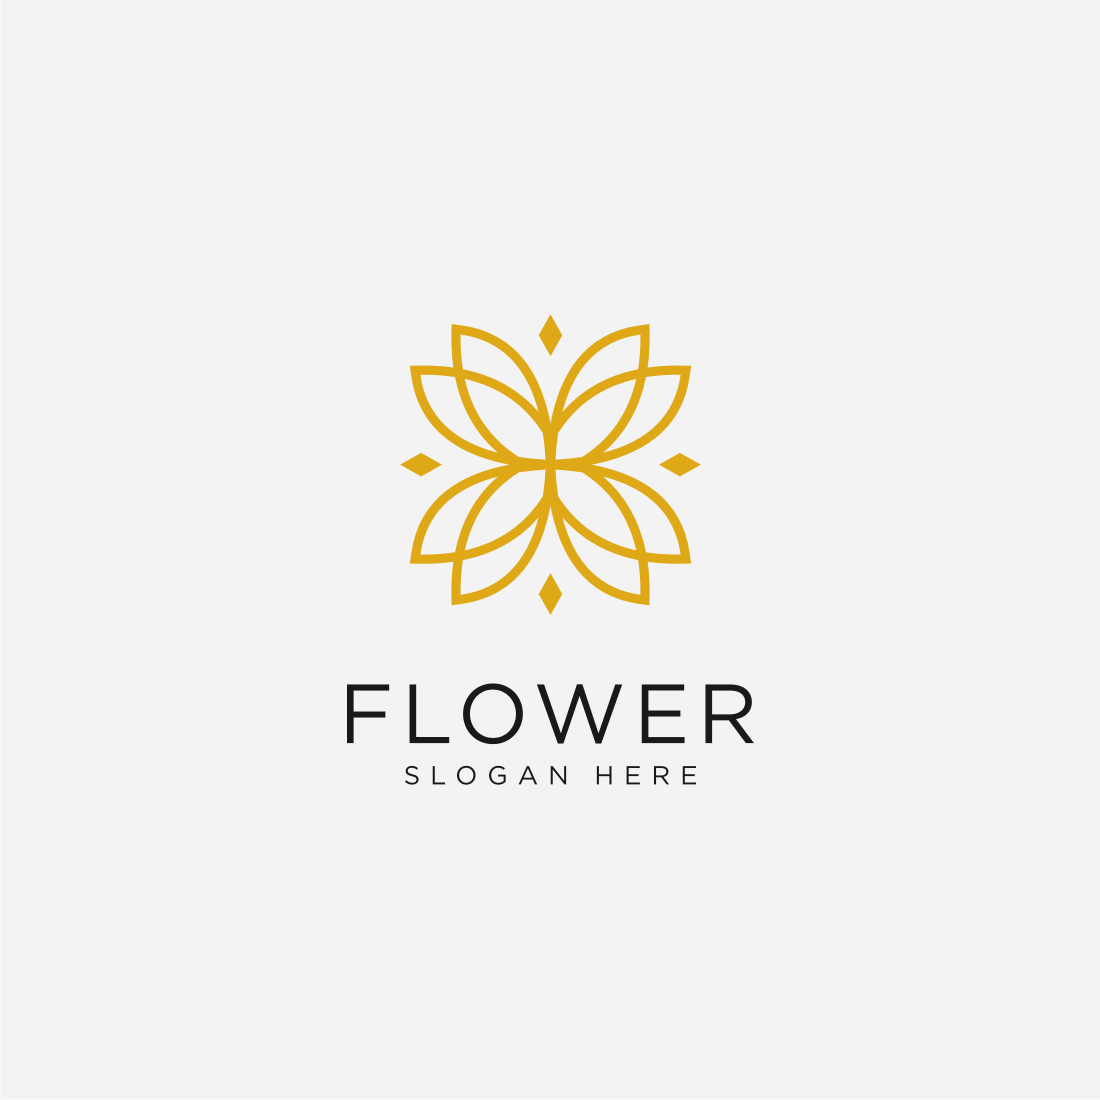 flower nature logo design template vector cover image.